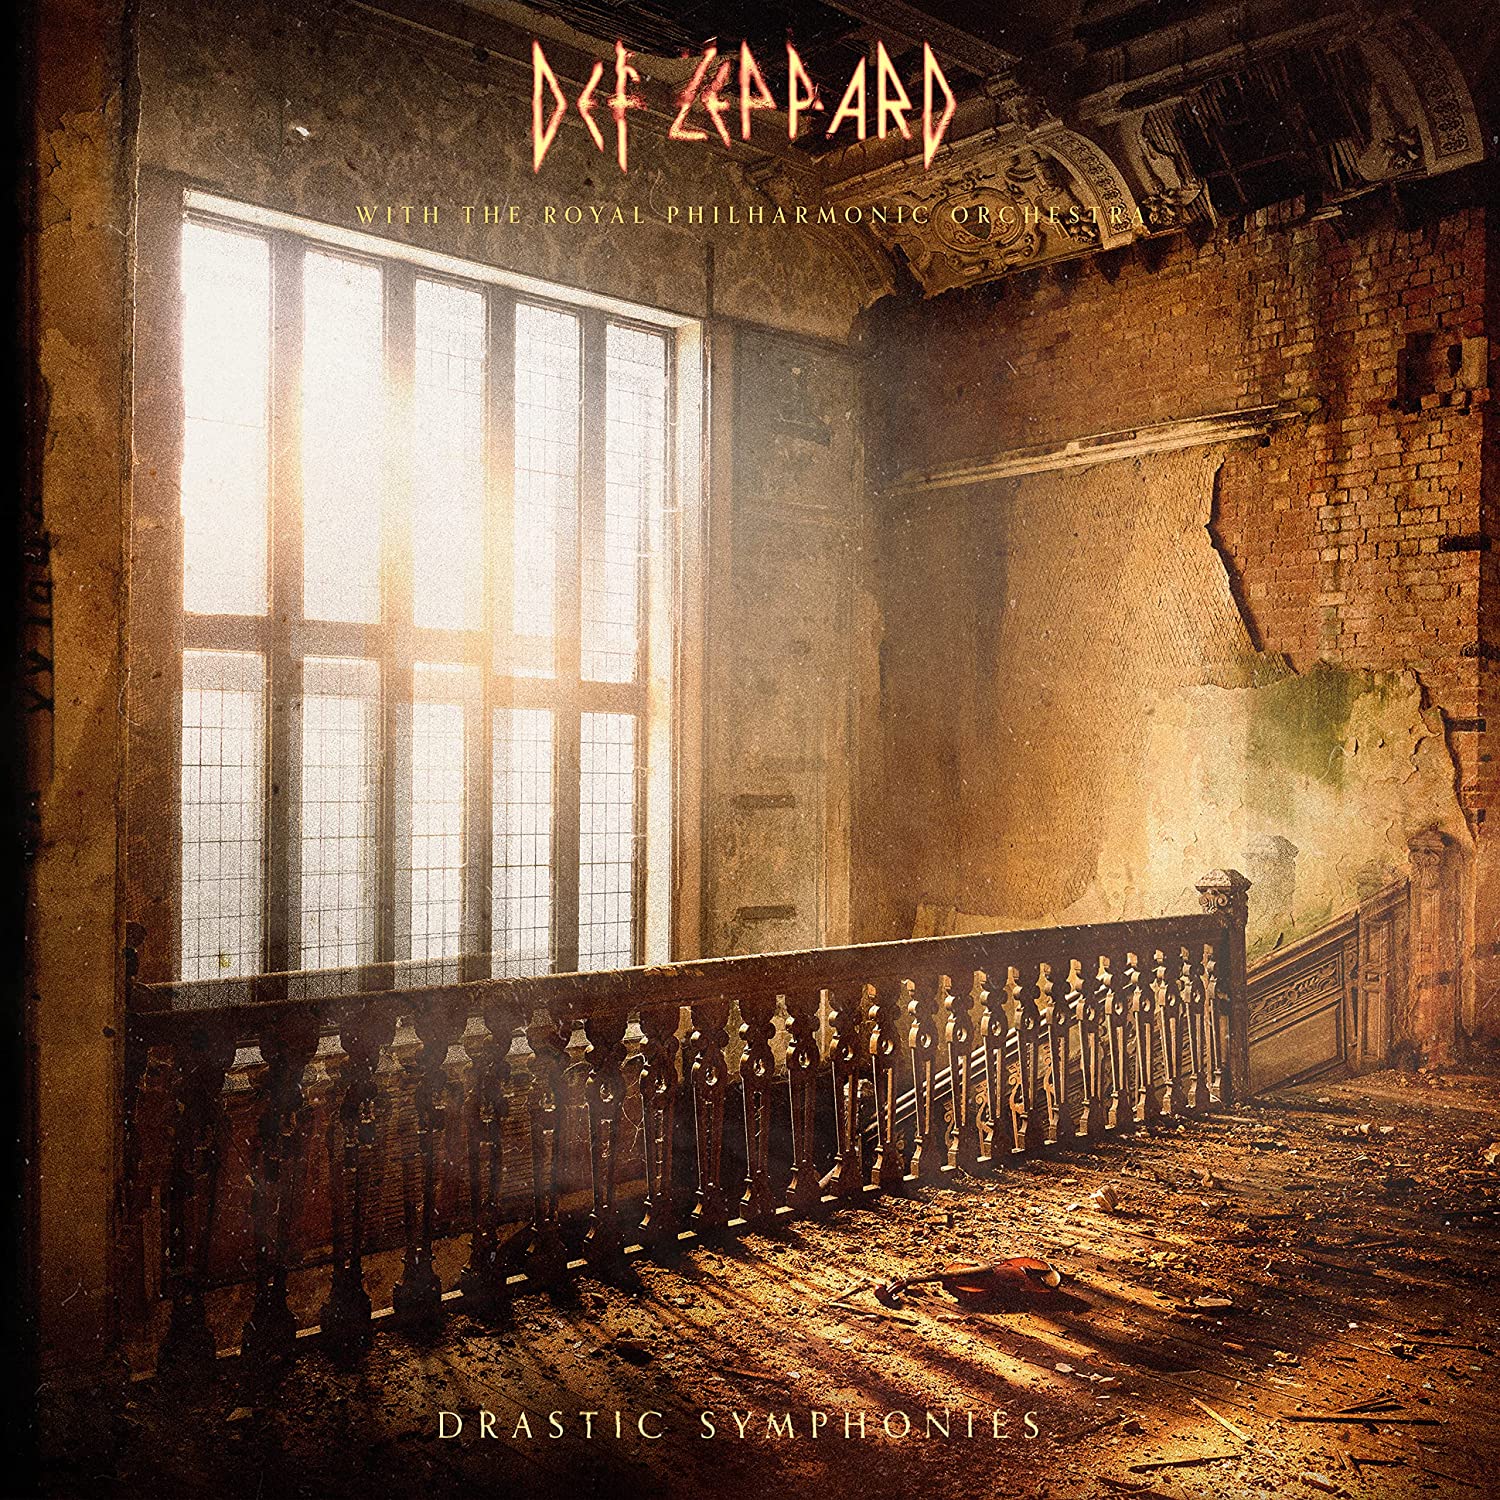 Def Leppard (With the Royal Philharmonic Orchestra) – Drastic Symphonies